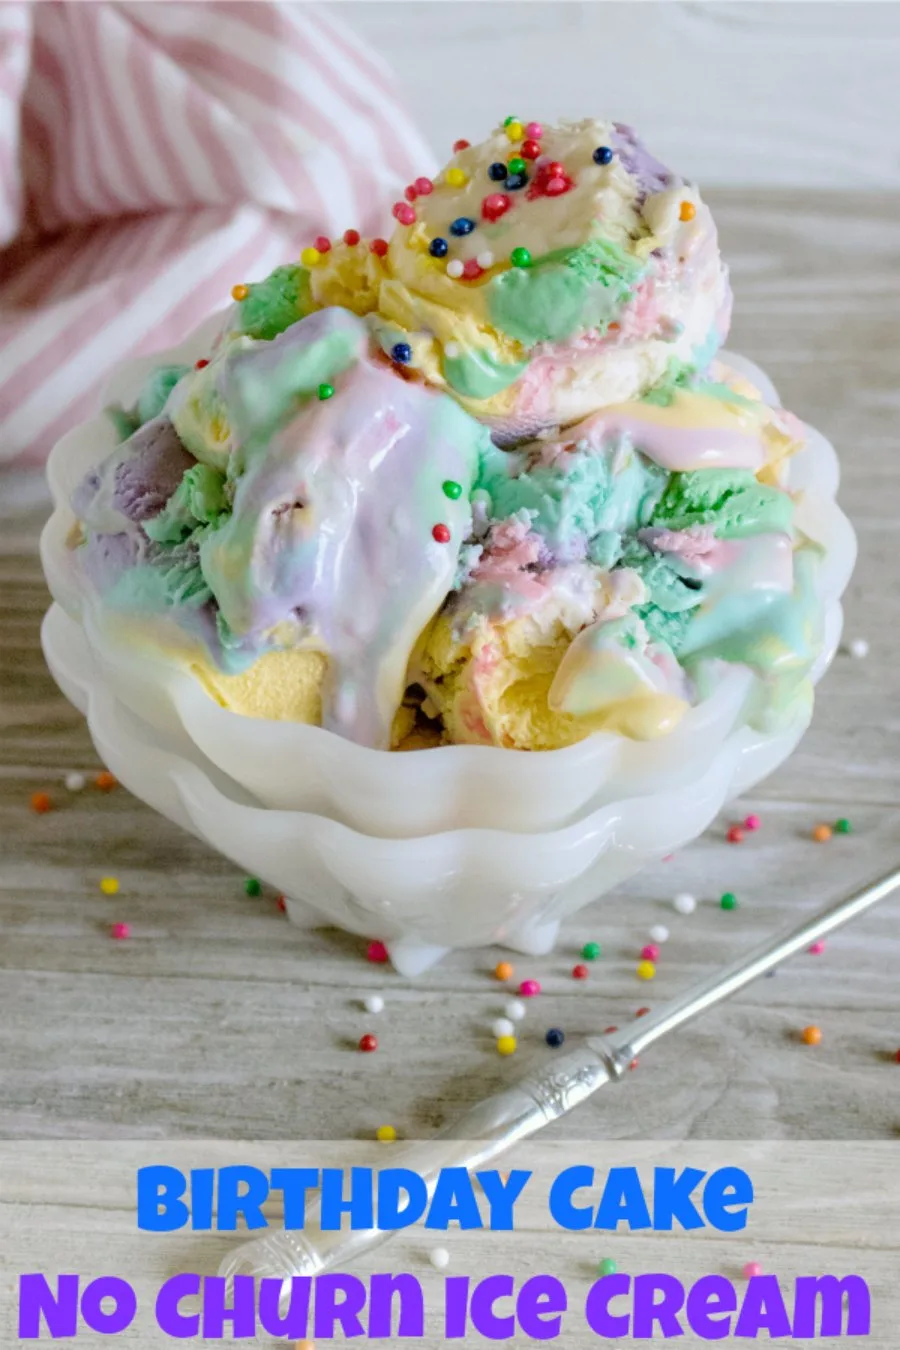 Enjoy the taste of birthday cake in no churn ice cream form! This recipe comes together quickly and can be easily colored to match your party's theme!